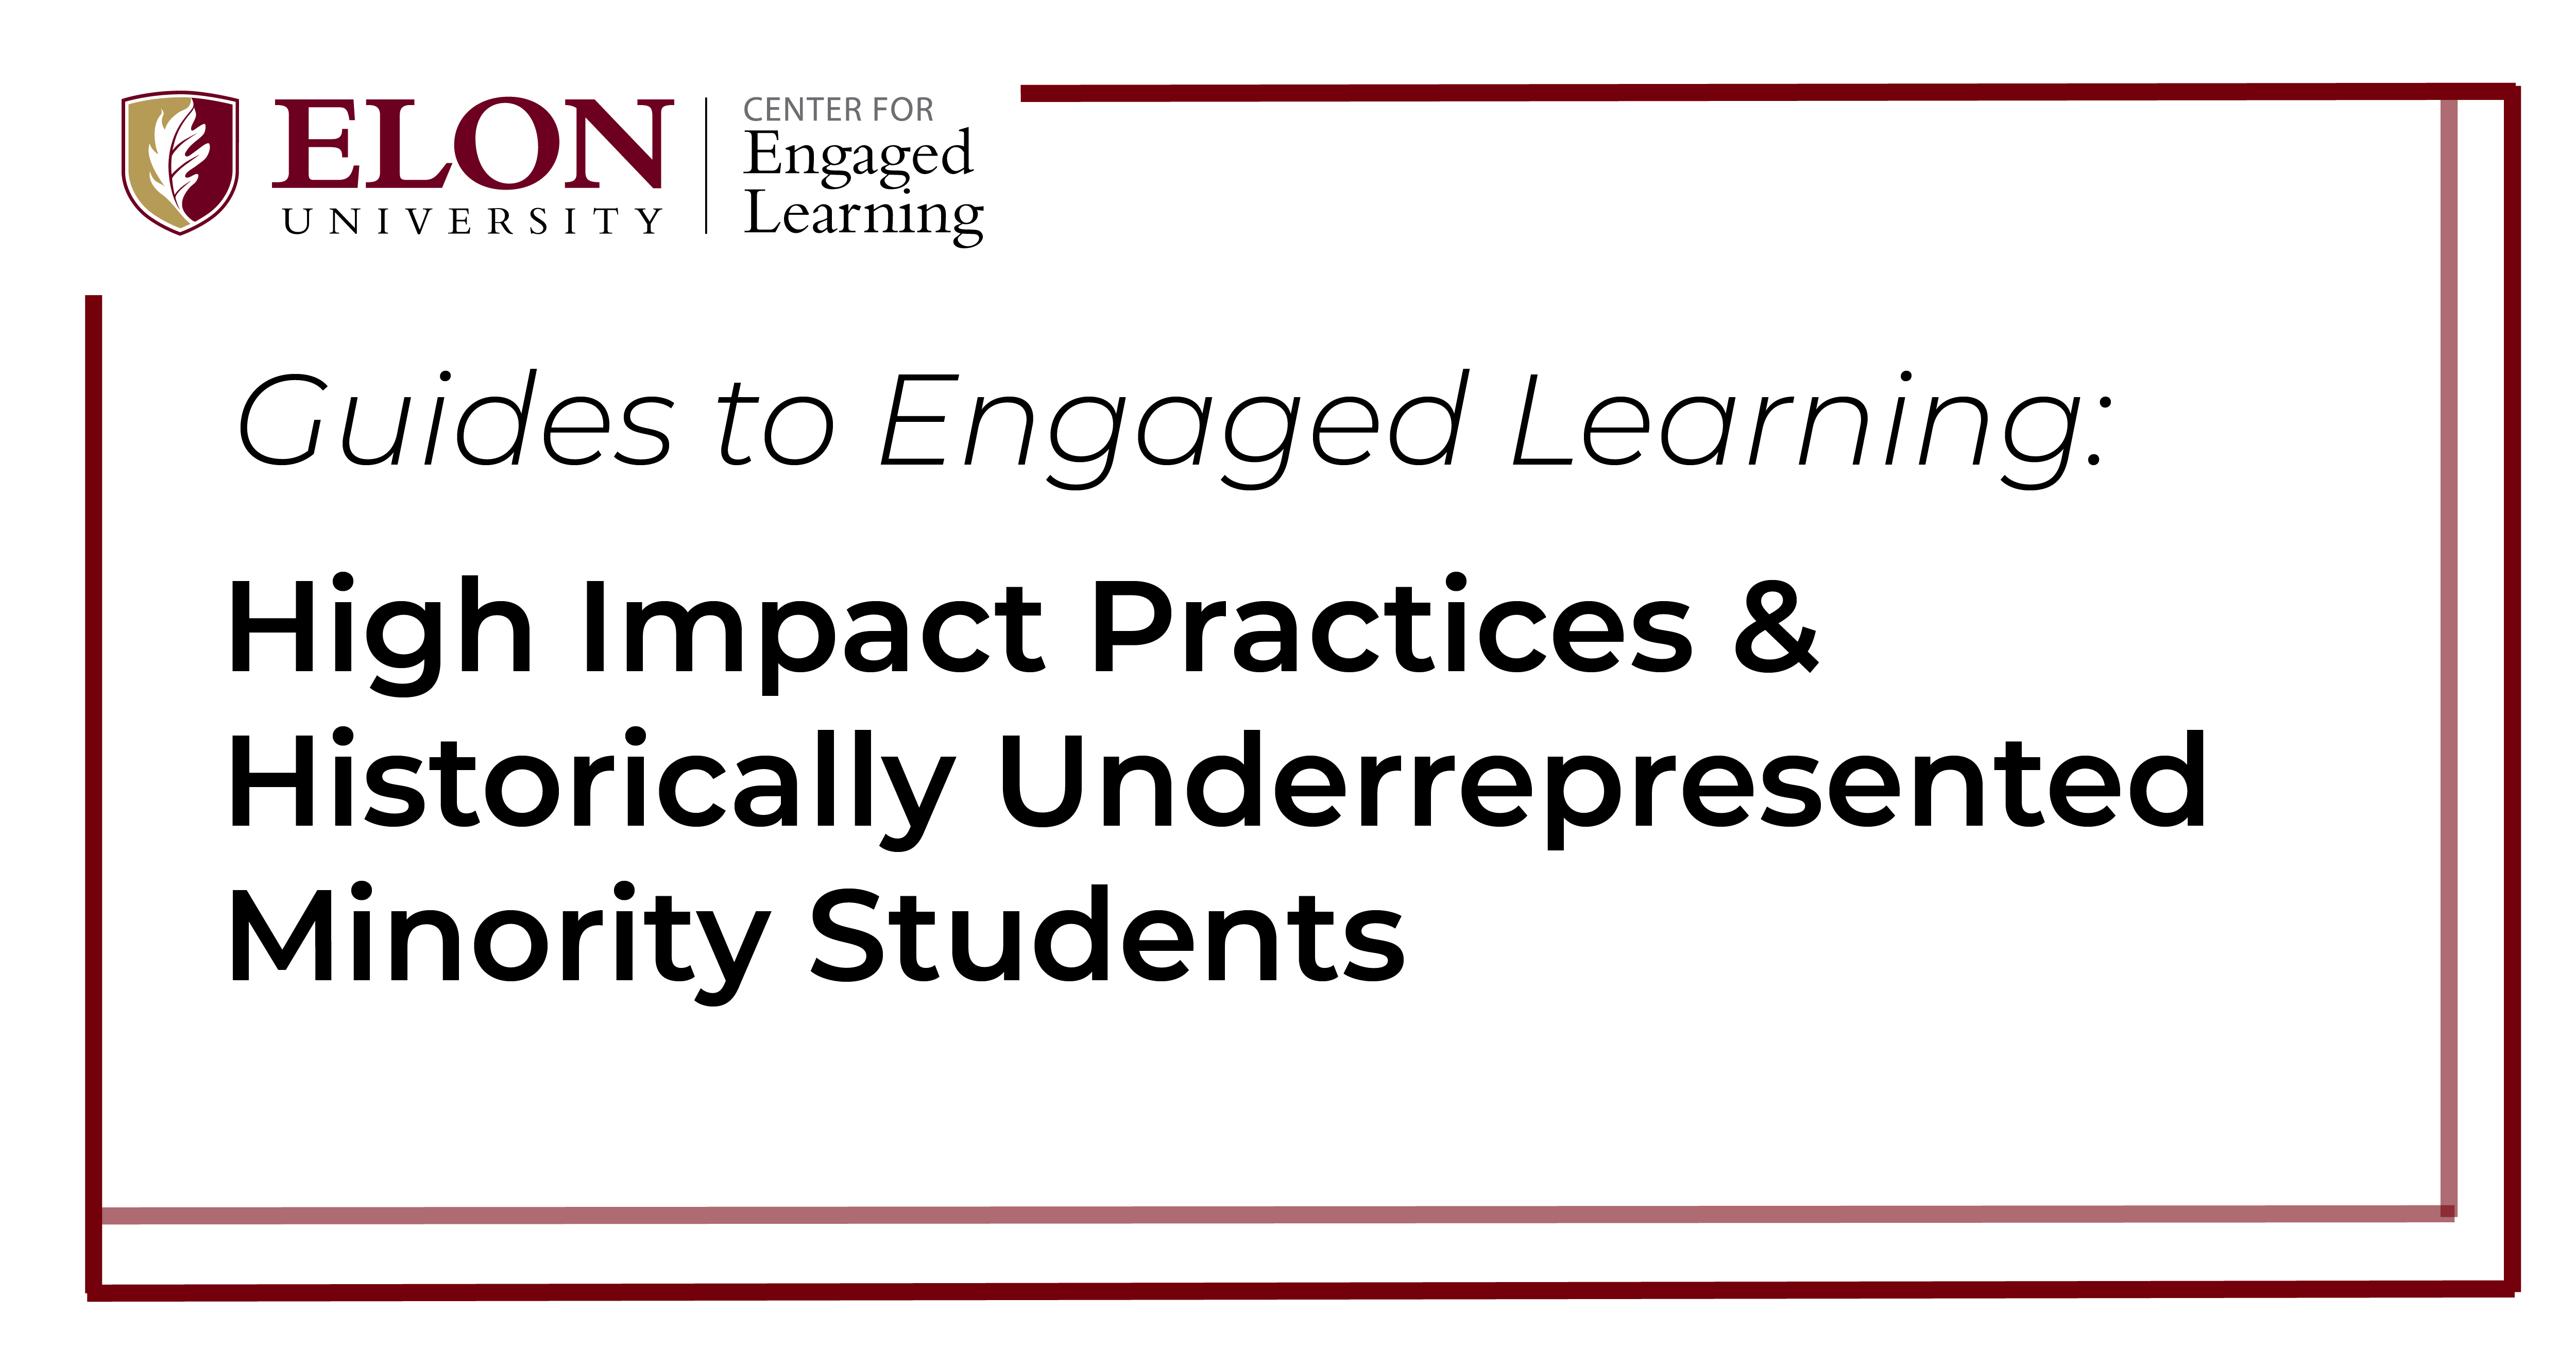 High Impact Practices and Historically Underrepresented Minority Students -  Center for Engaged Learning